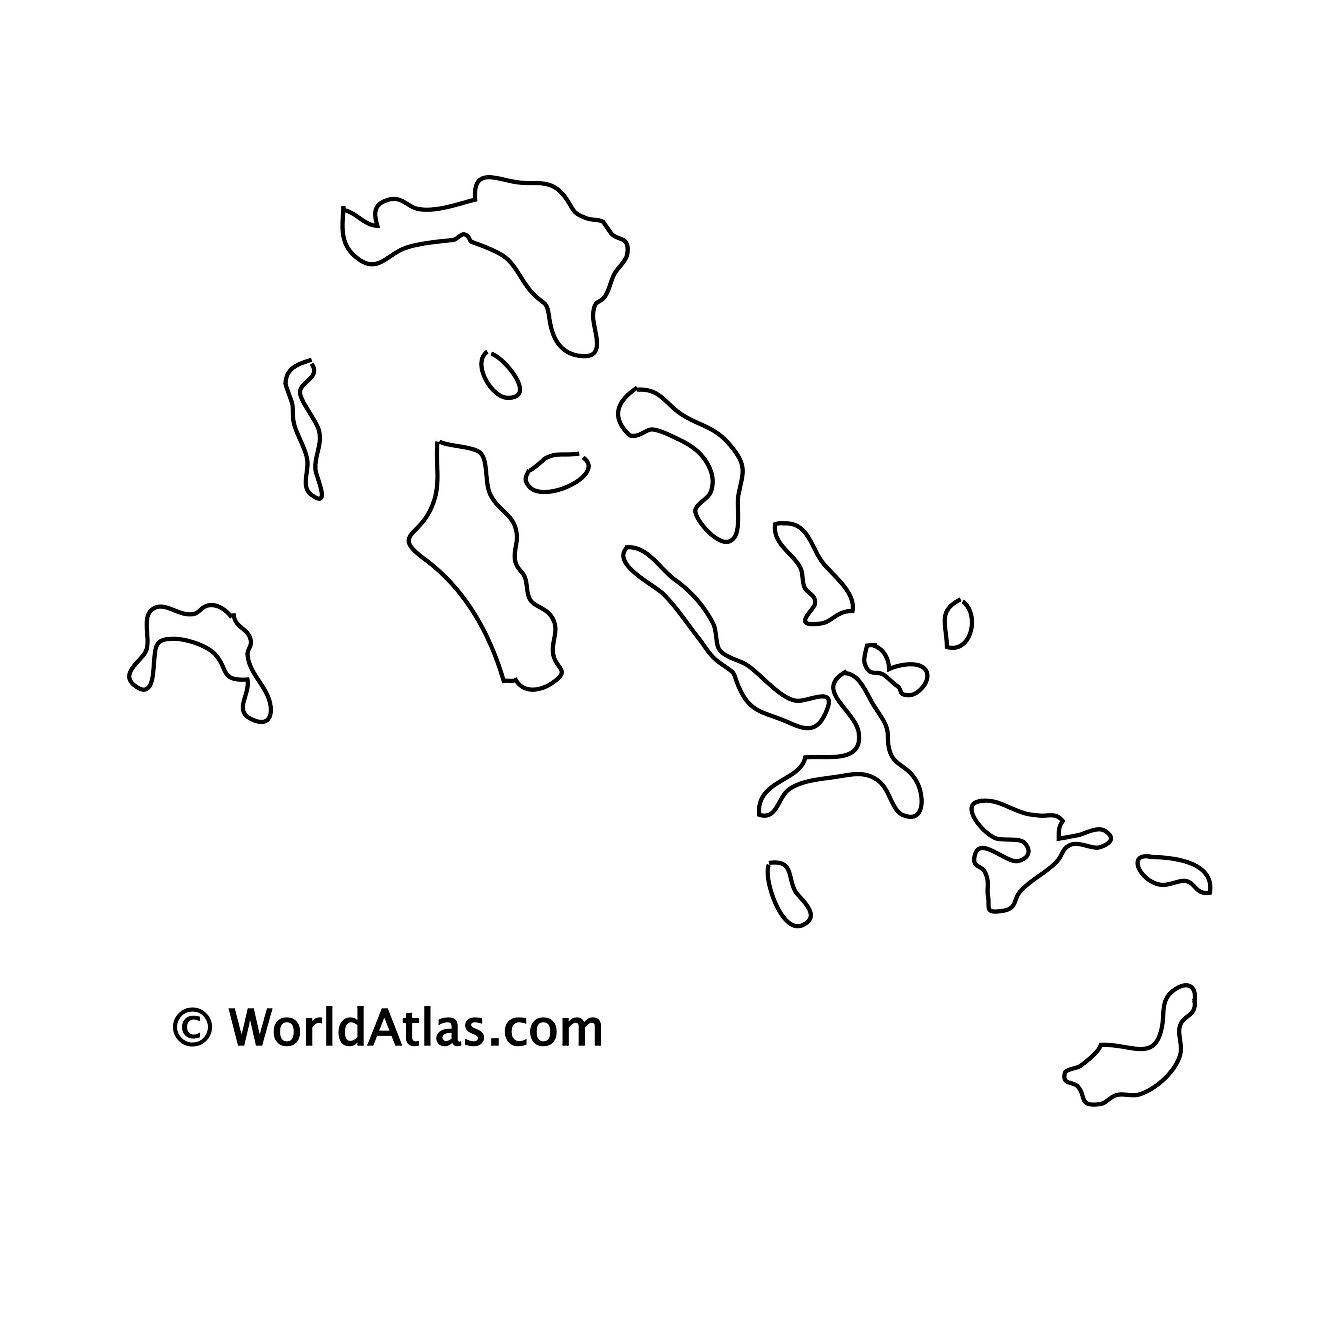 Blank outline map of The Bahamas